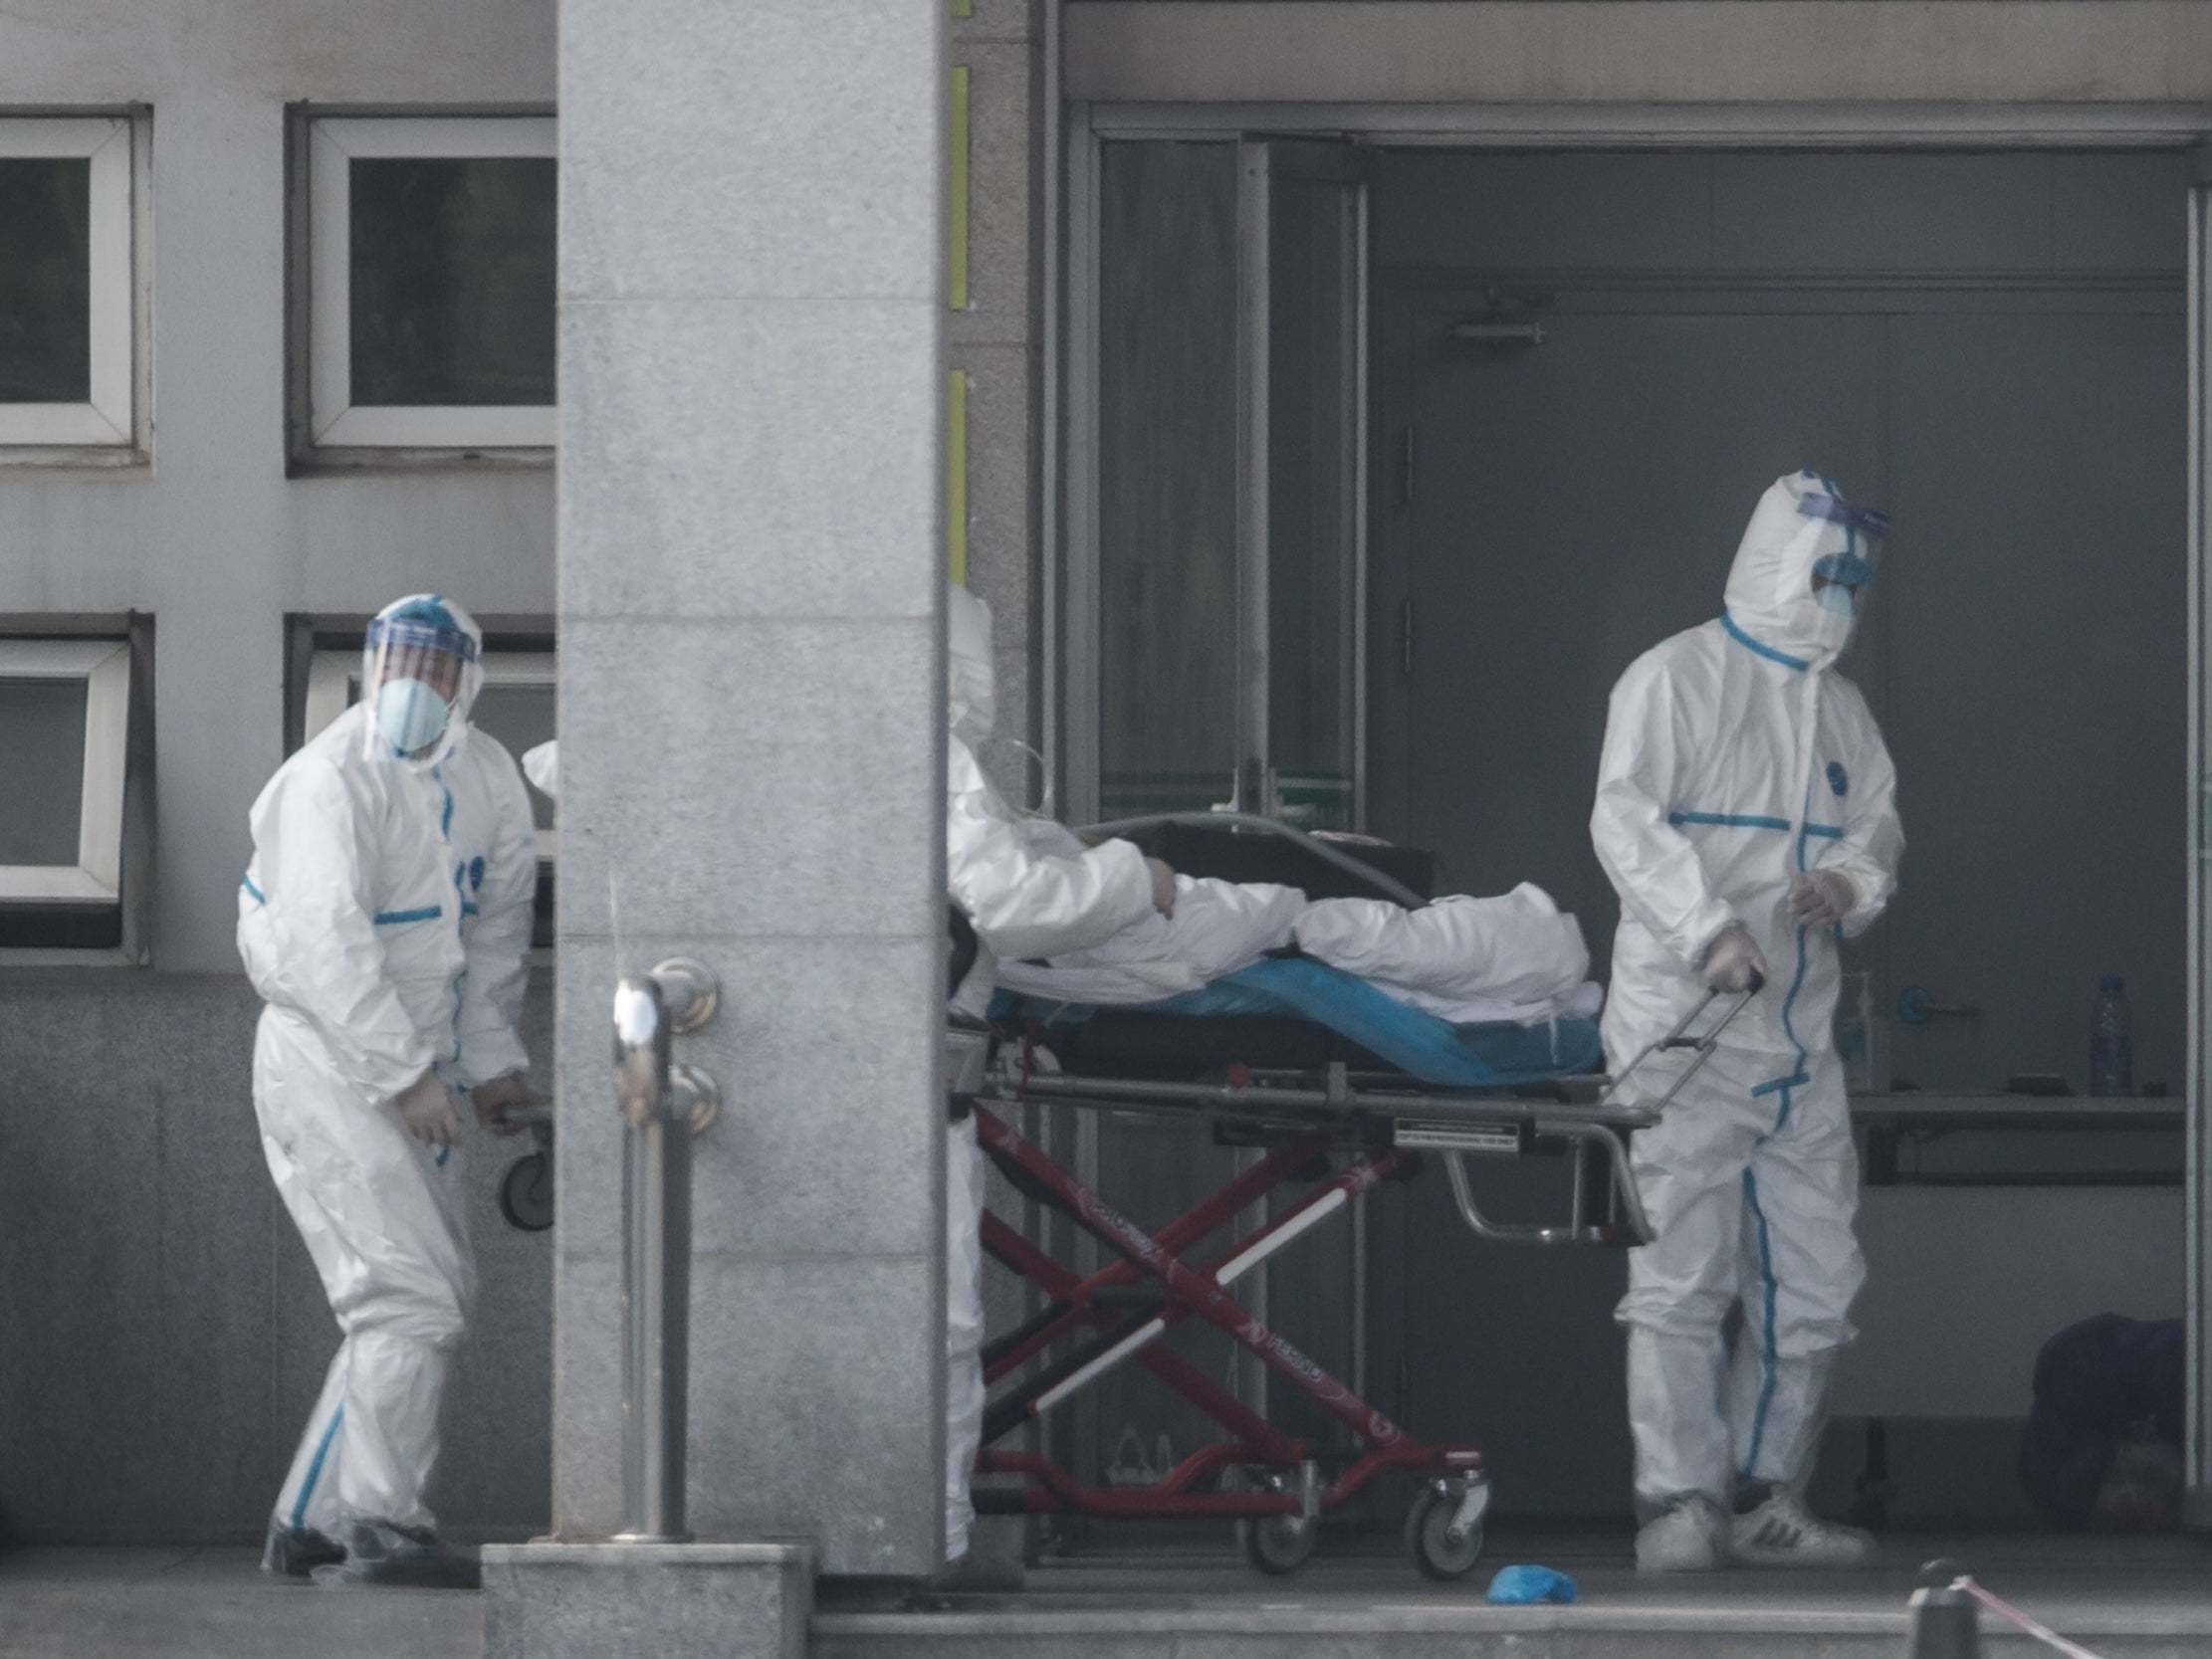 Medical staff carry a patient into the Jinyintan hospital, where patients infected with a new strain of Coronavirus identified as the cause of the Wuhan pneumonia outbreak are being treated